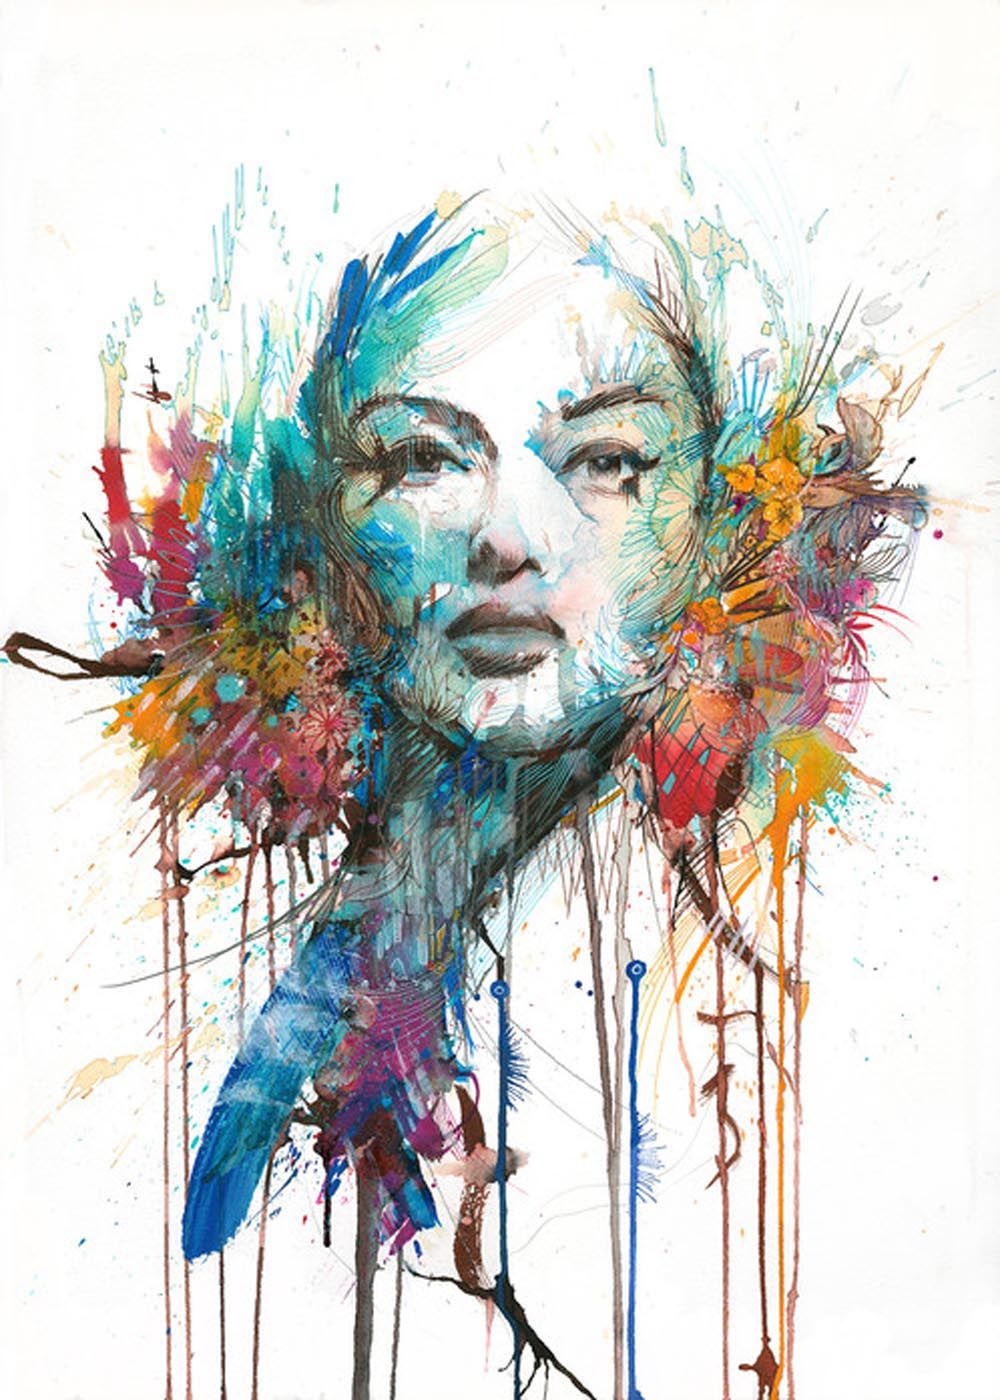 The Butterfly Effect by Carne Griffiths